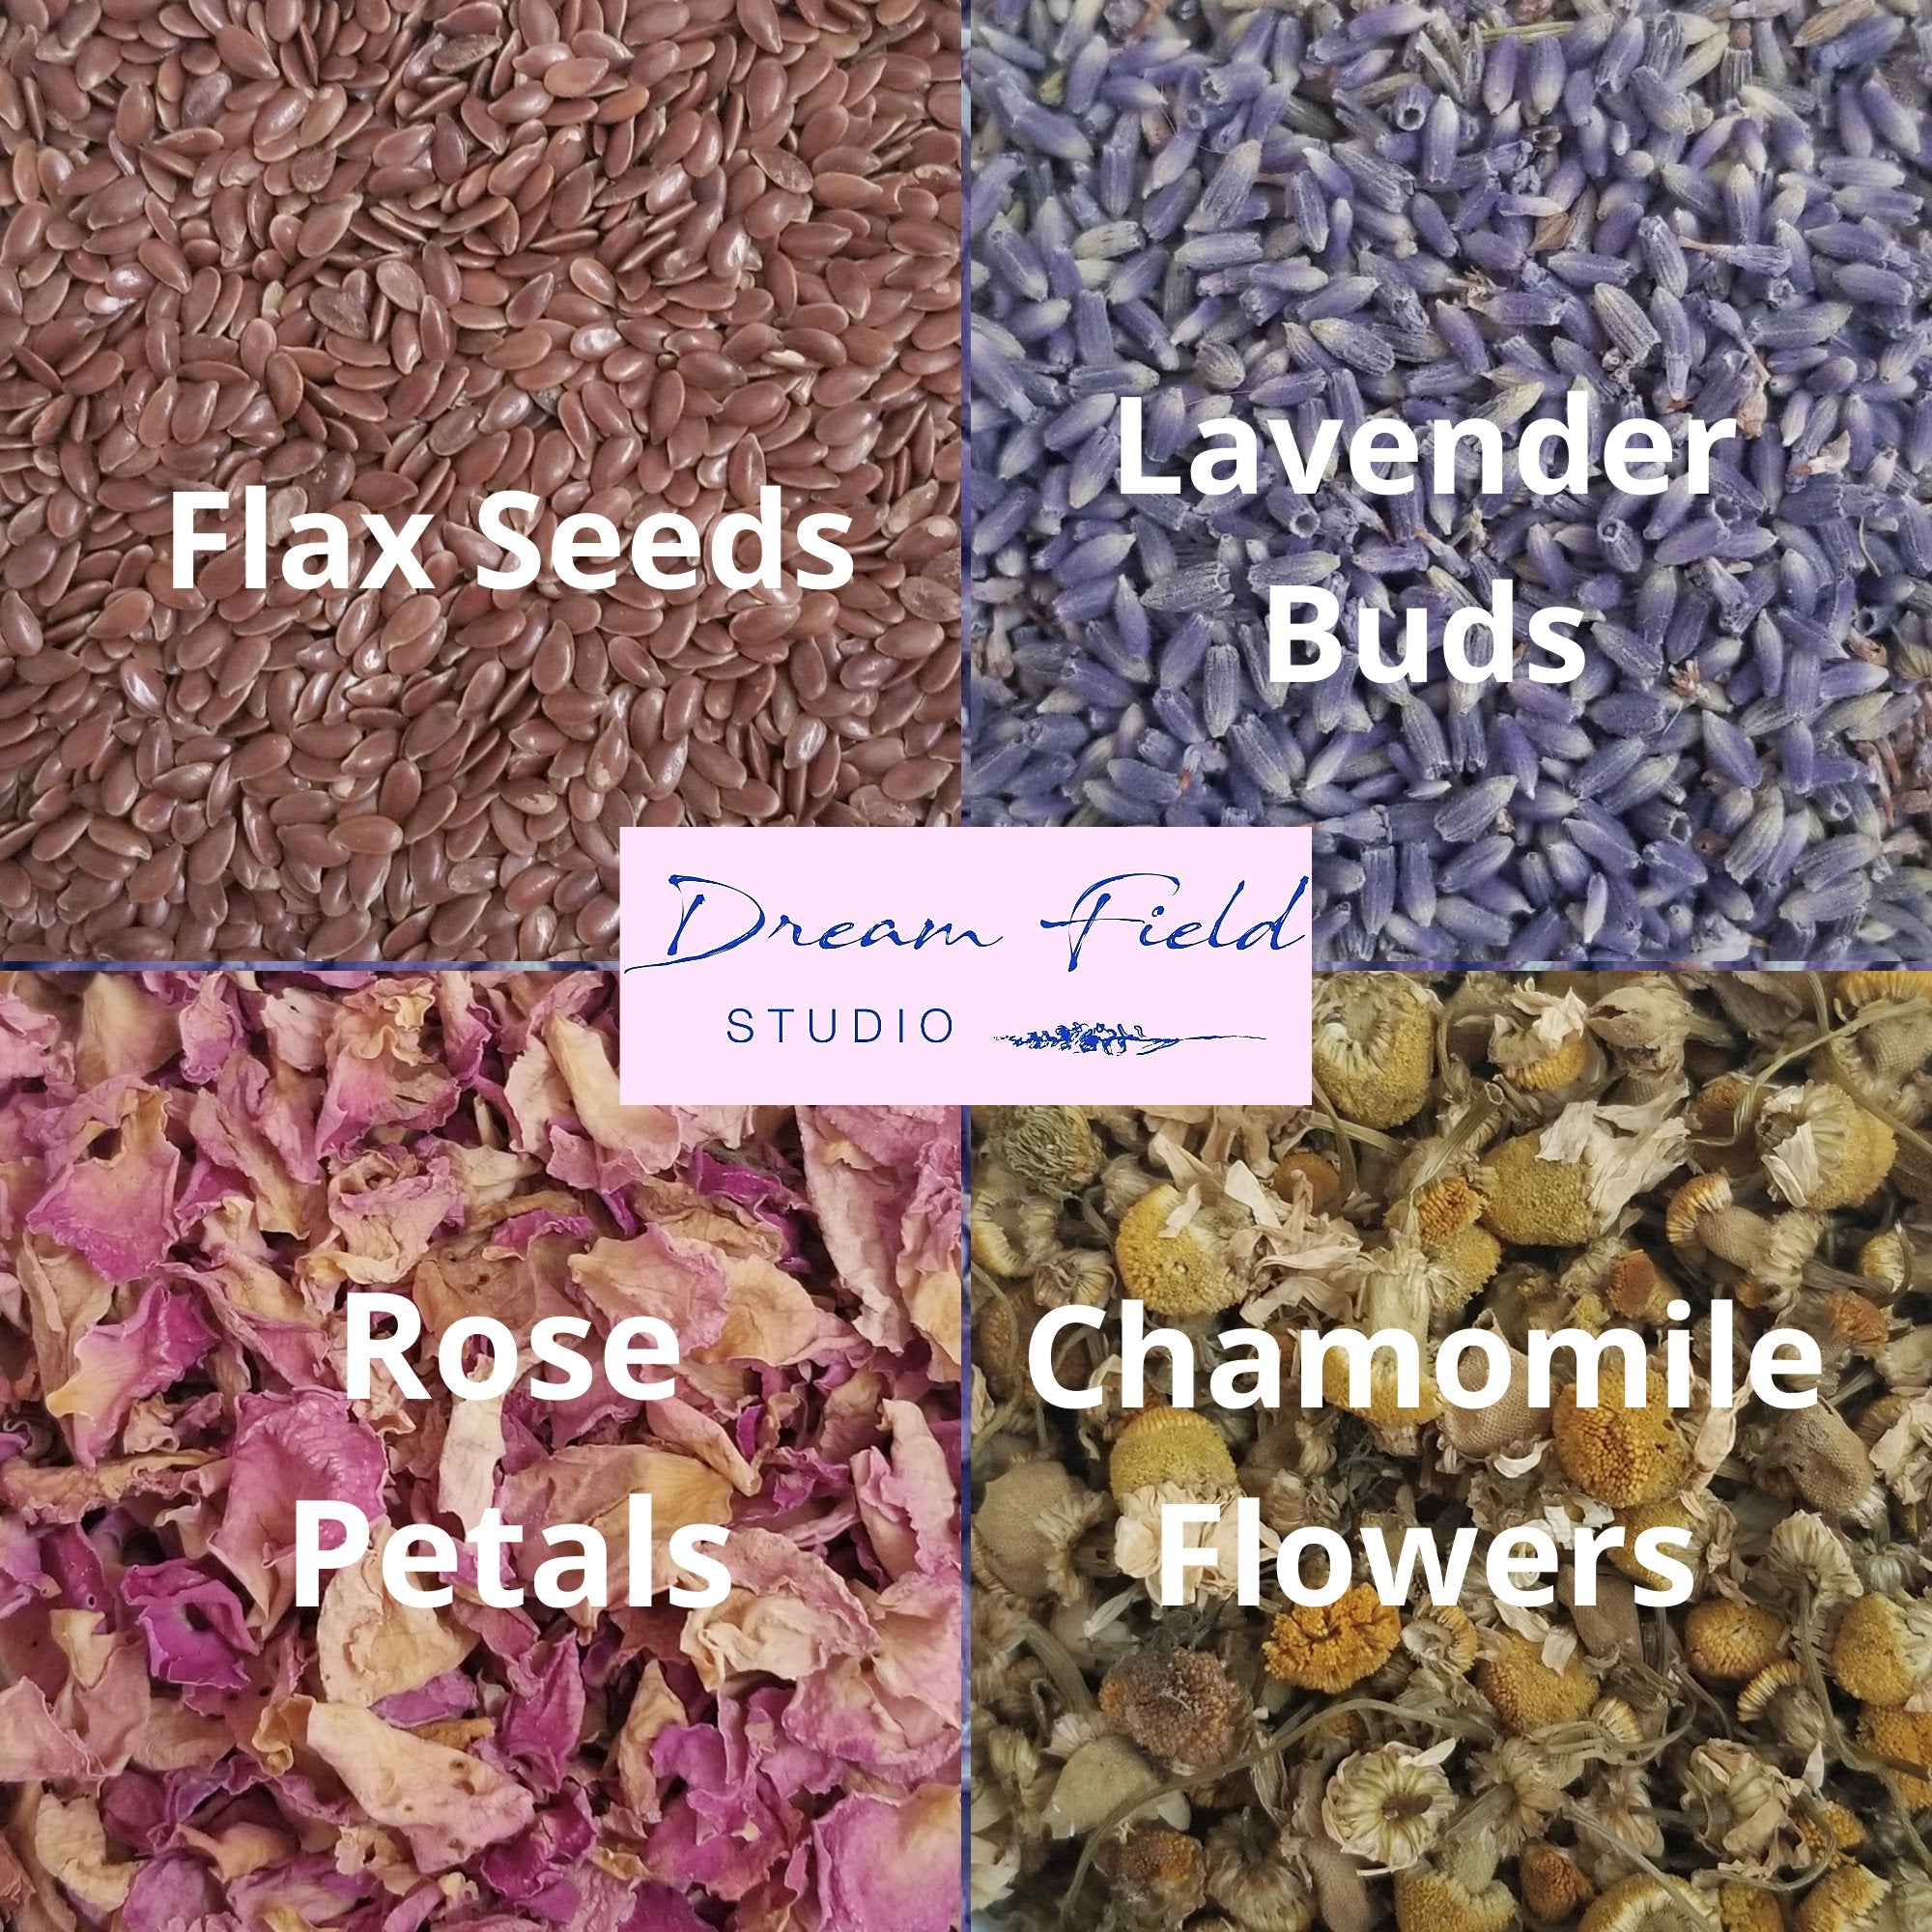 infographic showing ingredients for eye pillow rose petals lavender buds flax seeds and chamomile flowers